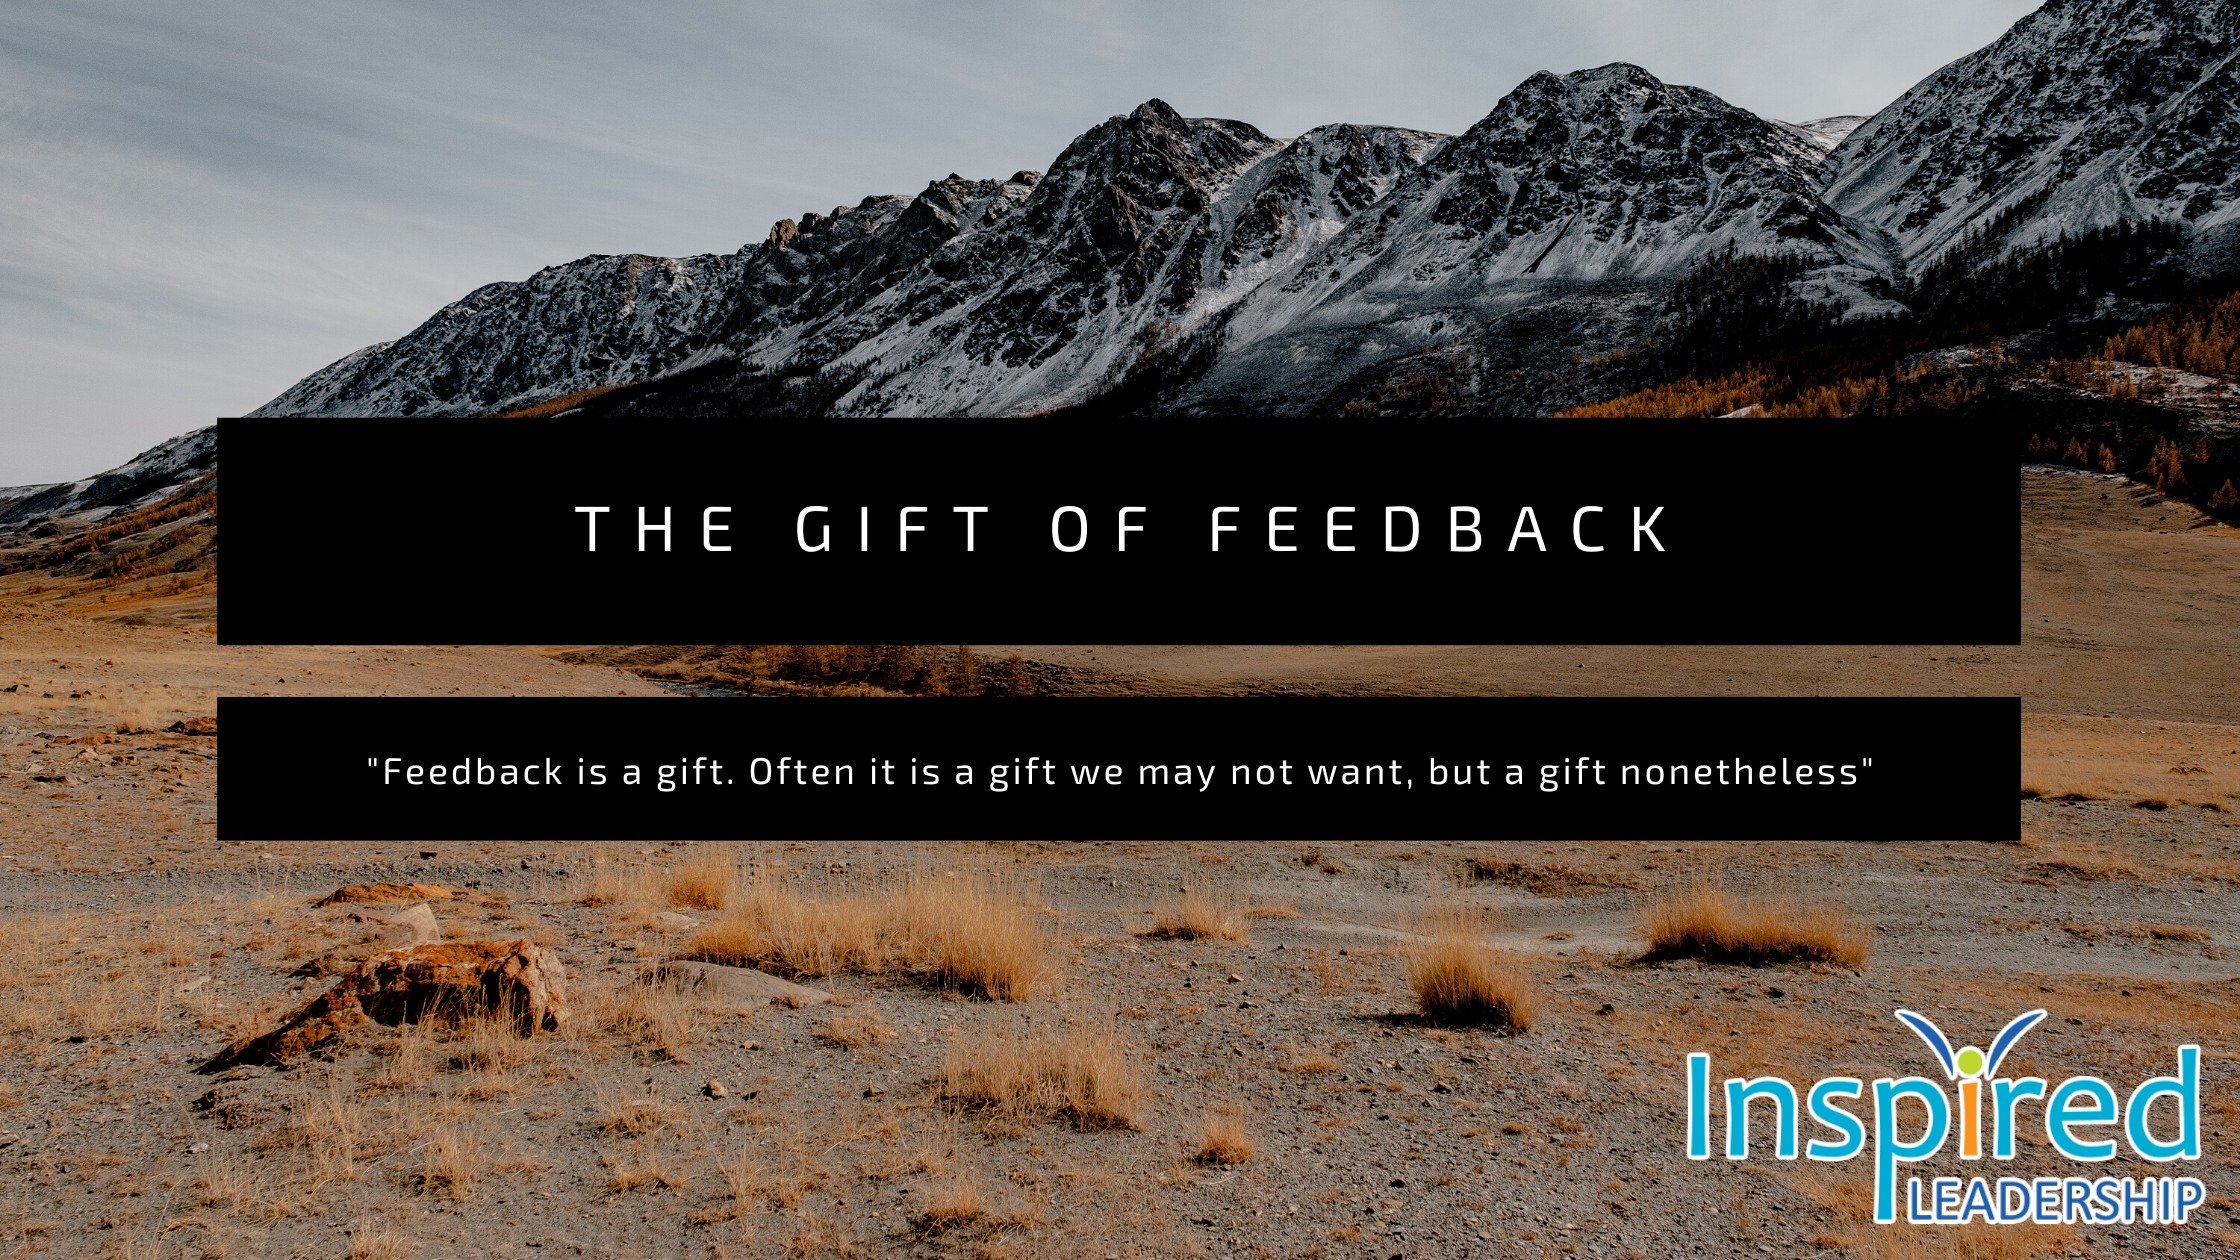 Feedback is a Gift - Business 4 Good